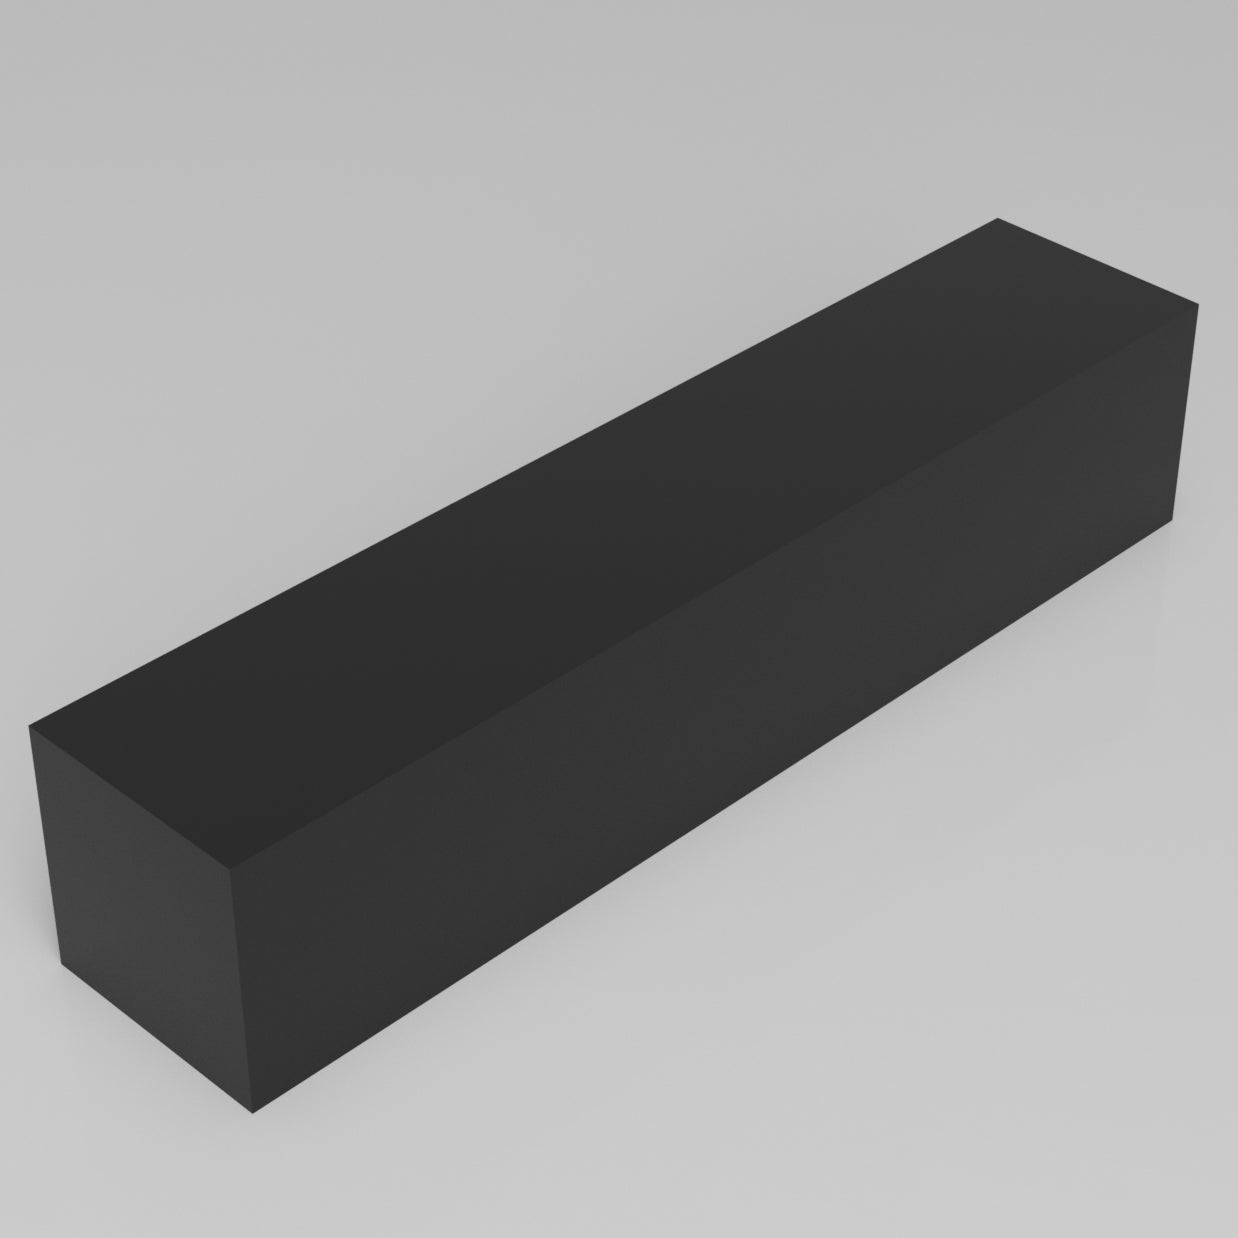 Machinable Wax Rectangular Block Front View 5 Inch by 5 Inch by 24 Inch